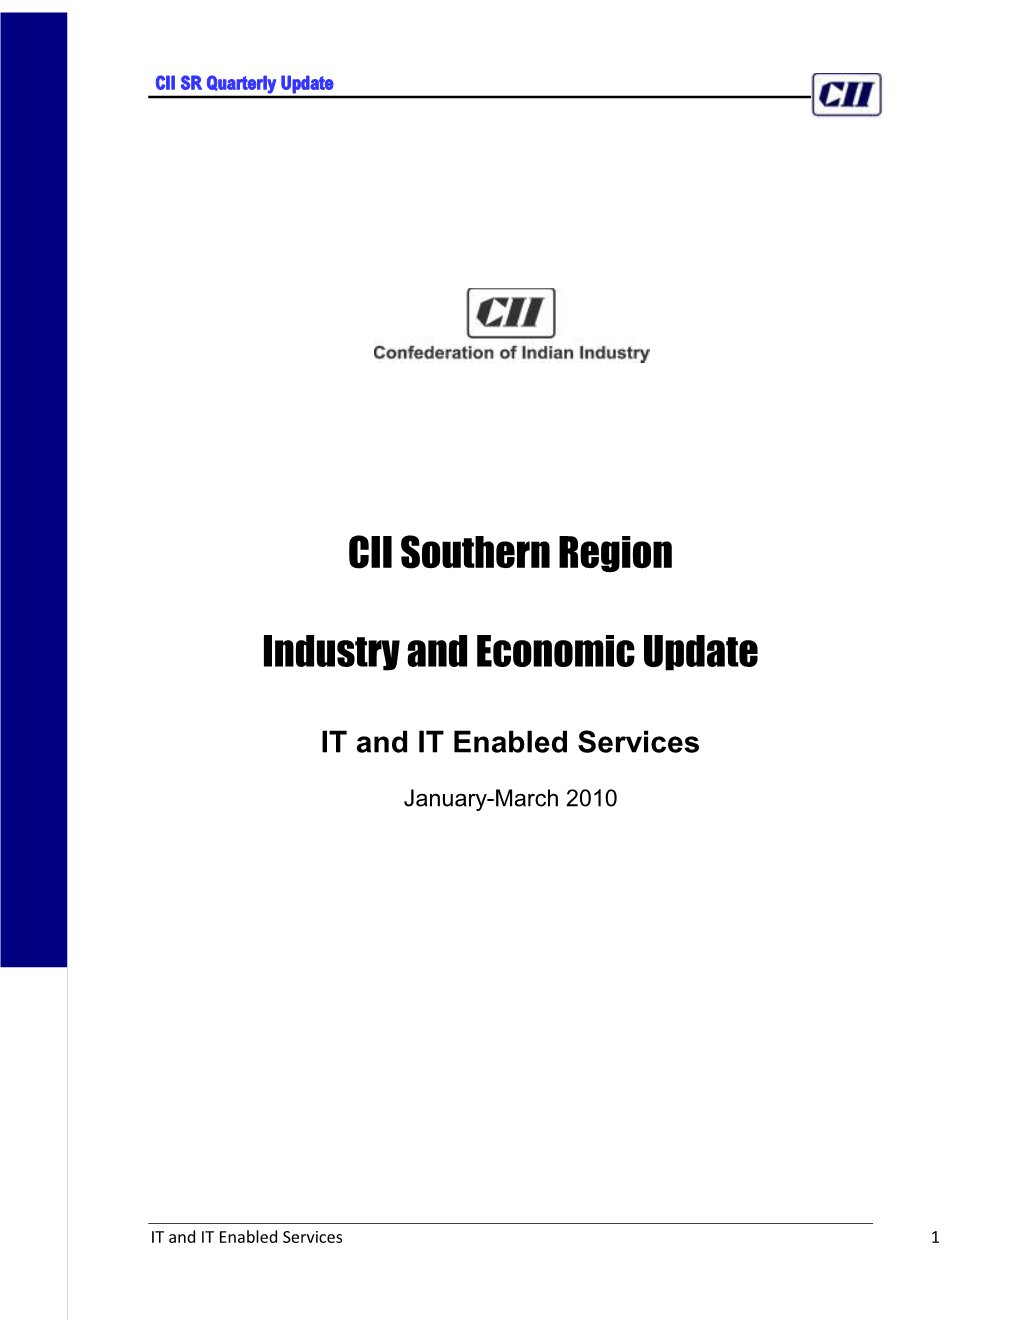 CII Southern Region Industry and Economic Update